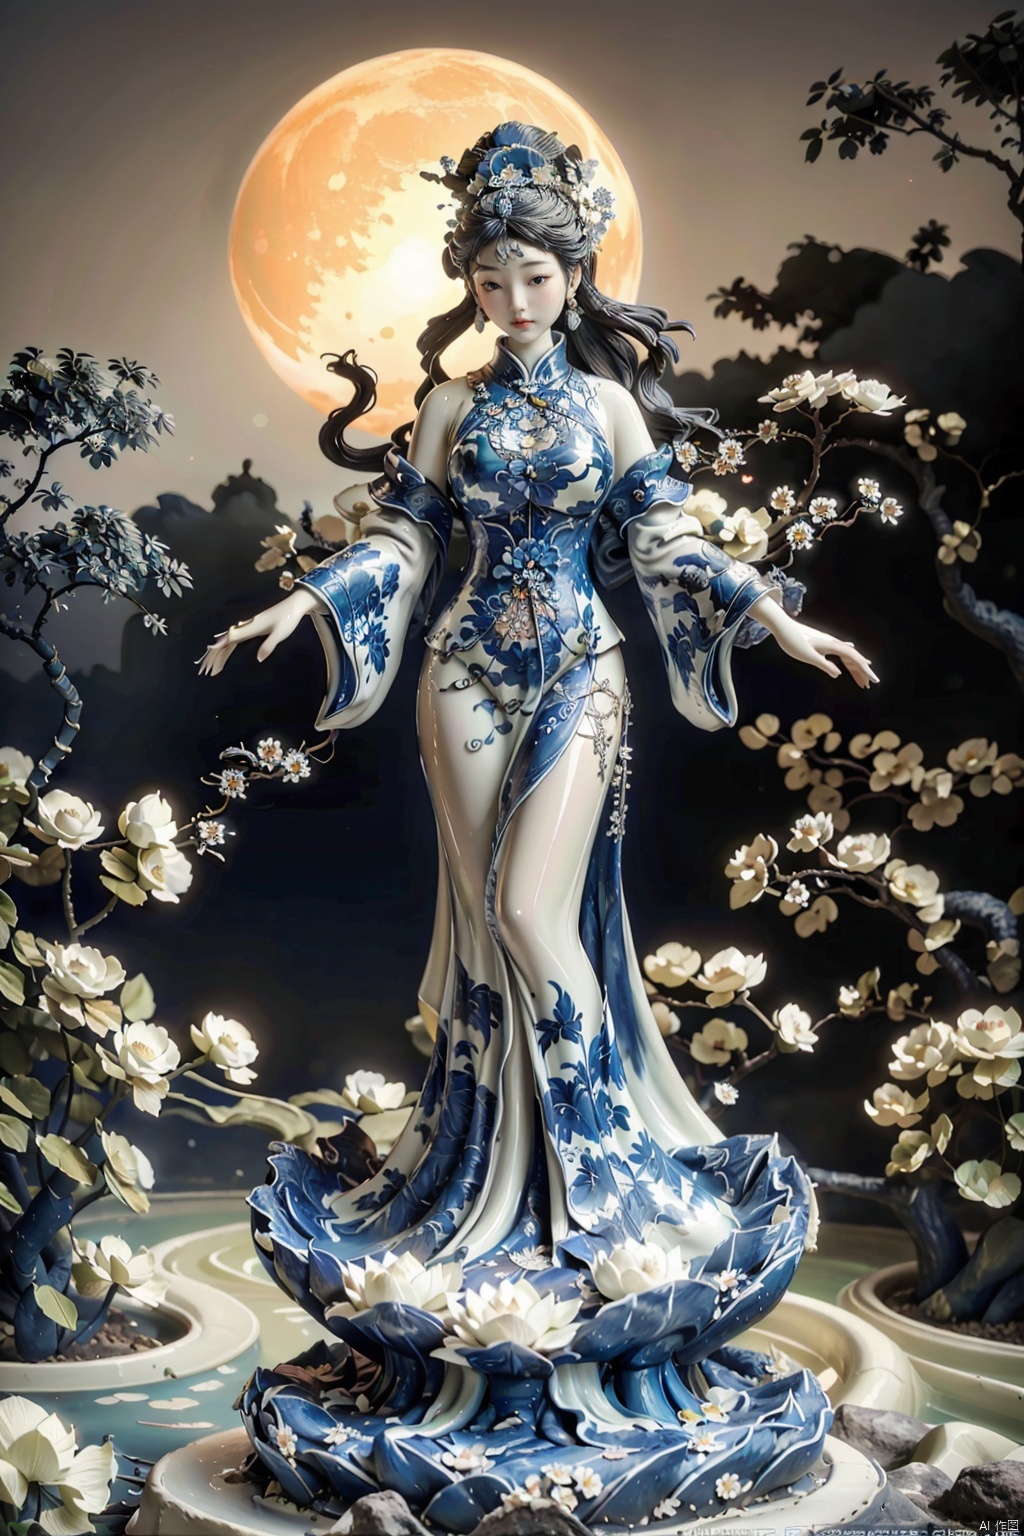 Lunar Goddess Pavilion: Amidst a luminescent bamboo grove, stands a towering Moon Goddess statue, her eight arms outstretched, each holding a celestial orb. The statue, crafted from qinghuaci porcelain with a shimmering glaze, seems to glow under the moonlight. Lotus flowers float in a tranquil pond nearby, mirroring the statue's serenity.